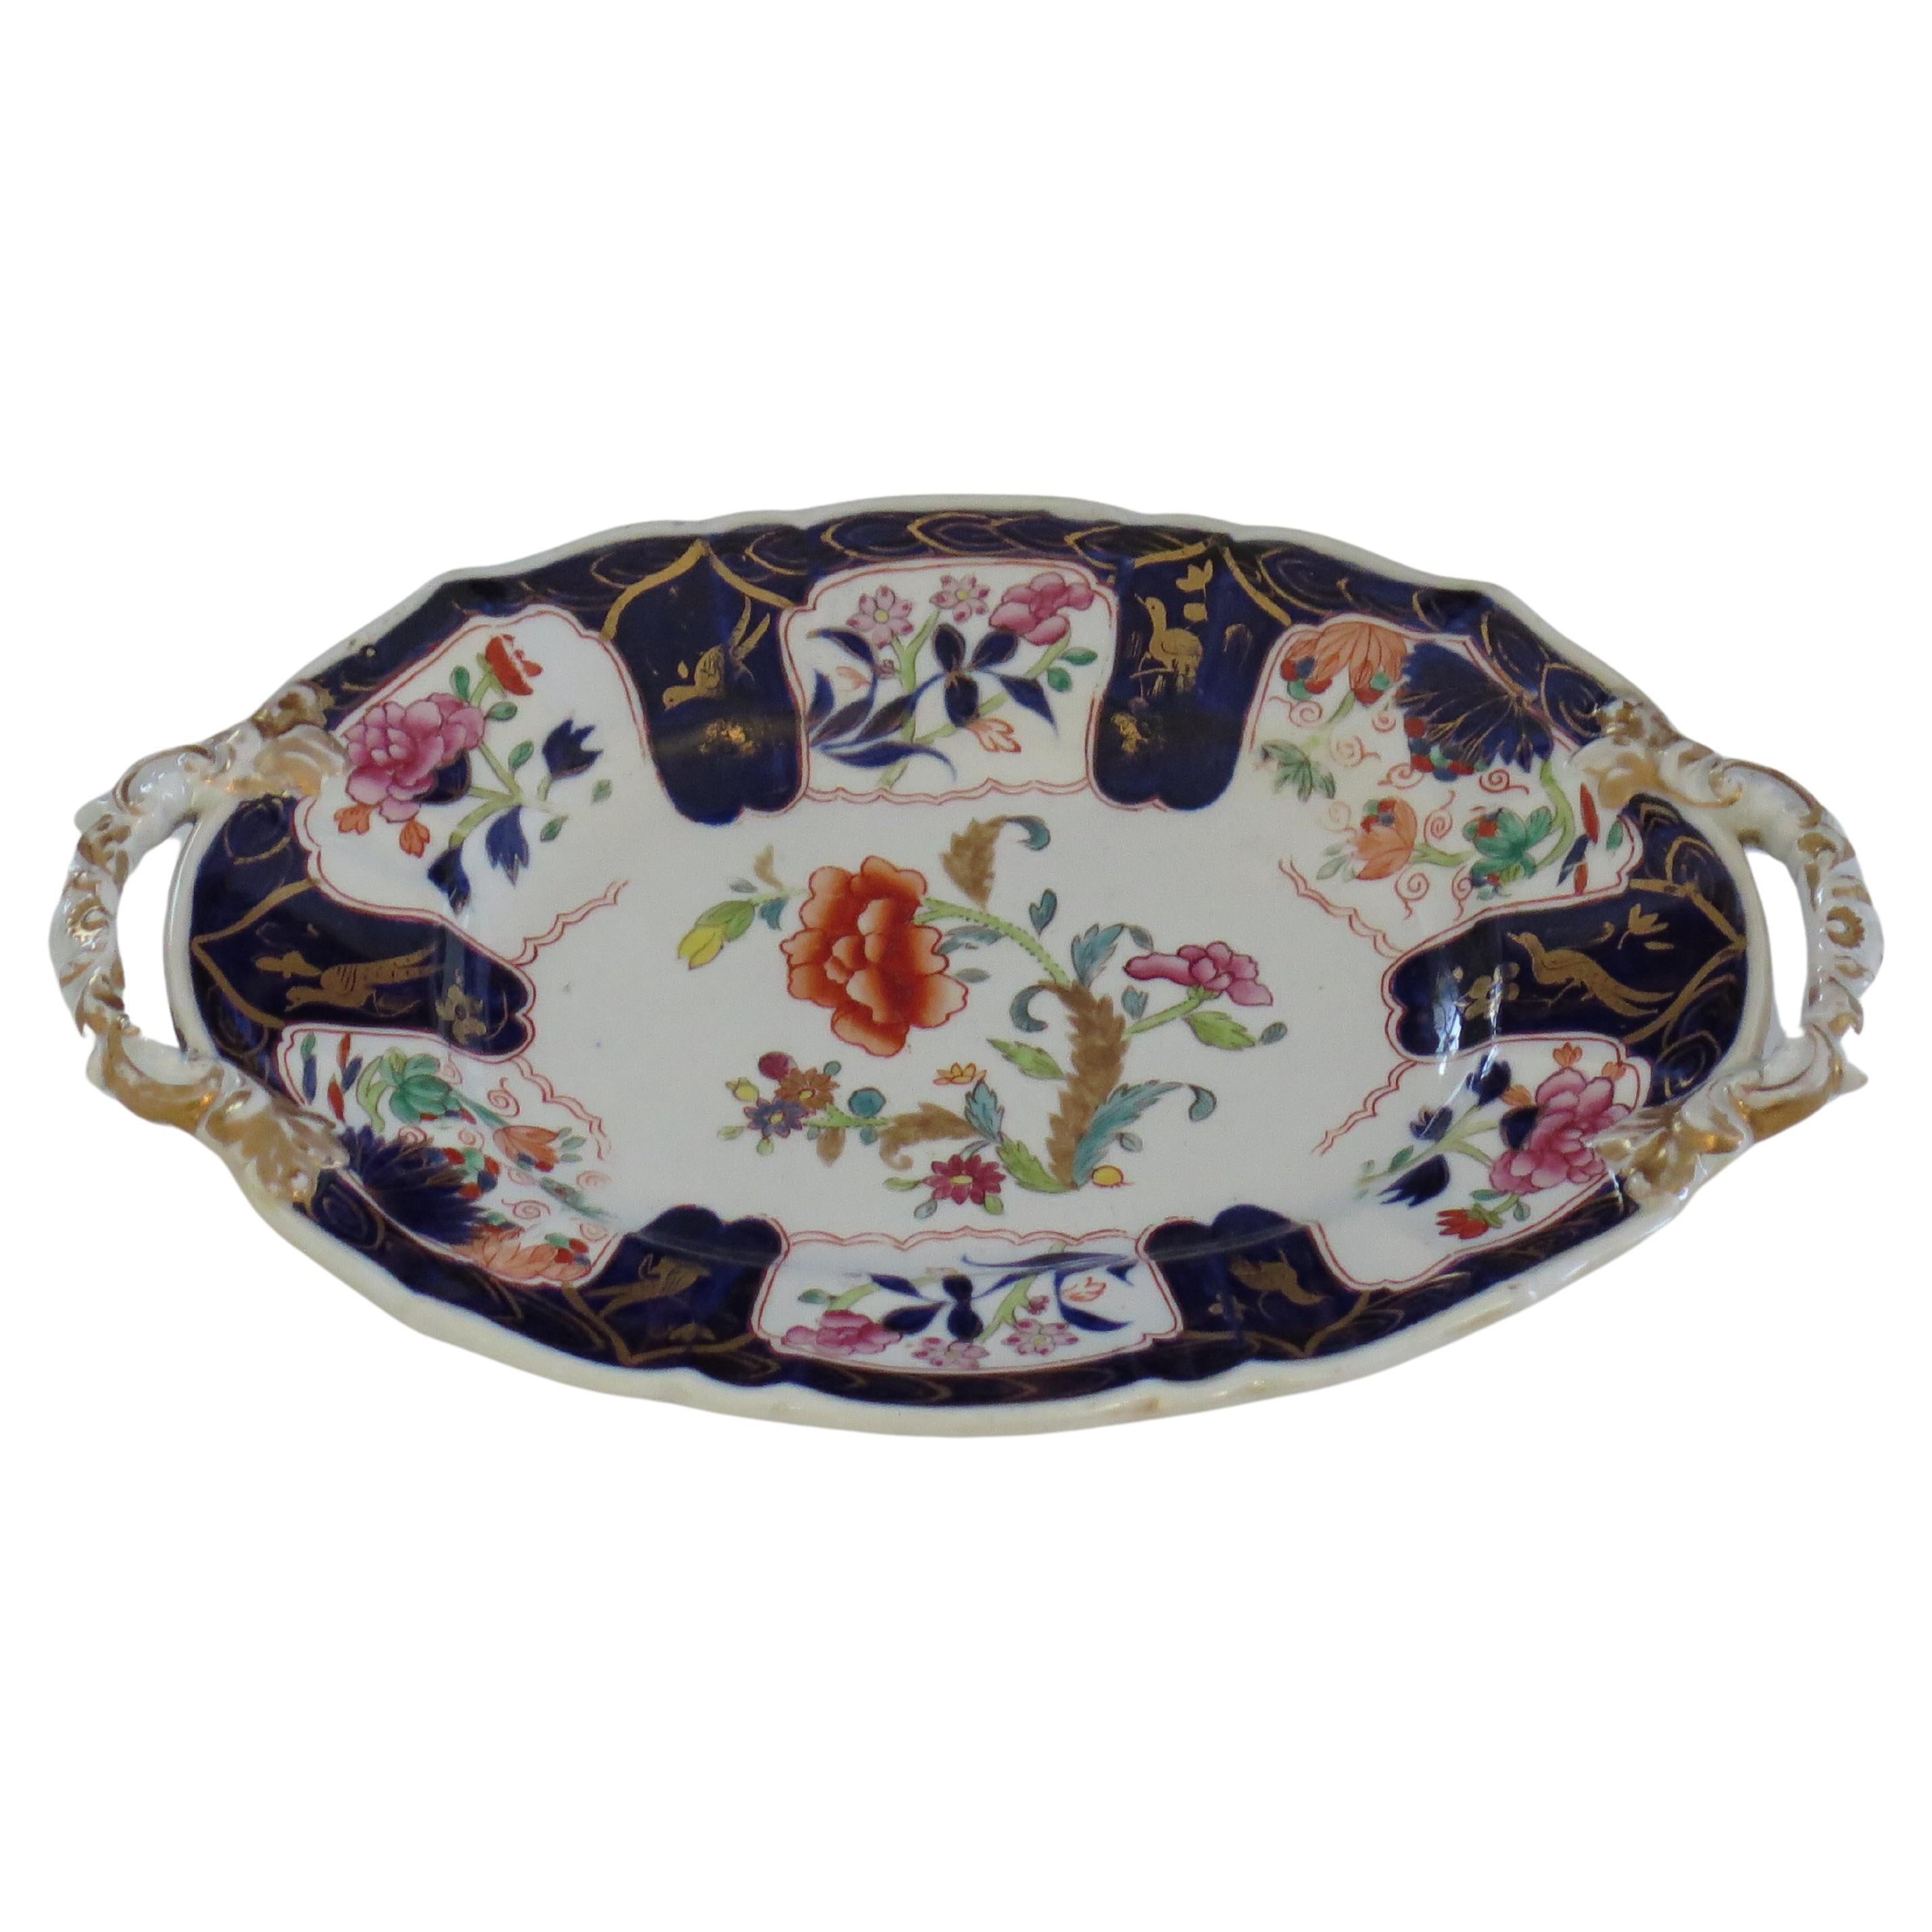 This is a very good hand painted Mason's ironstone oval Platter, in the Gold Pheasants, Peony & Fern pattern, dating to the late Georgian period   circa 1820.

The piece is well potted with an oval shape having radial ribs, a wavy edge and two